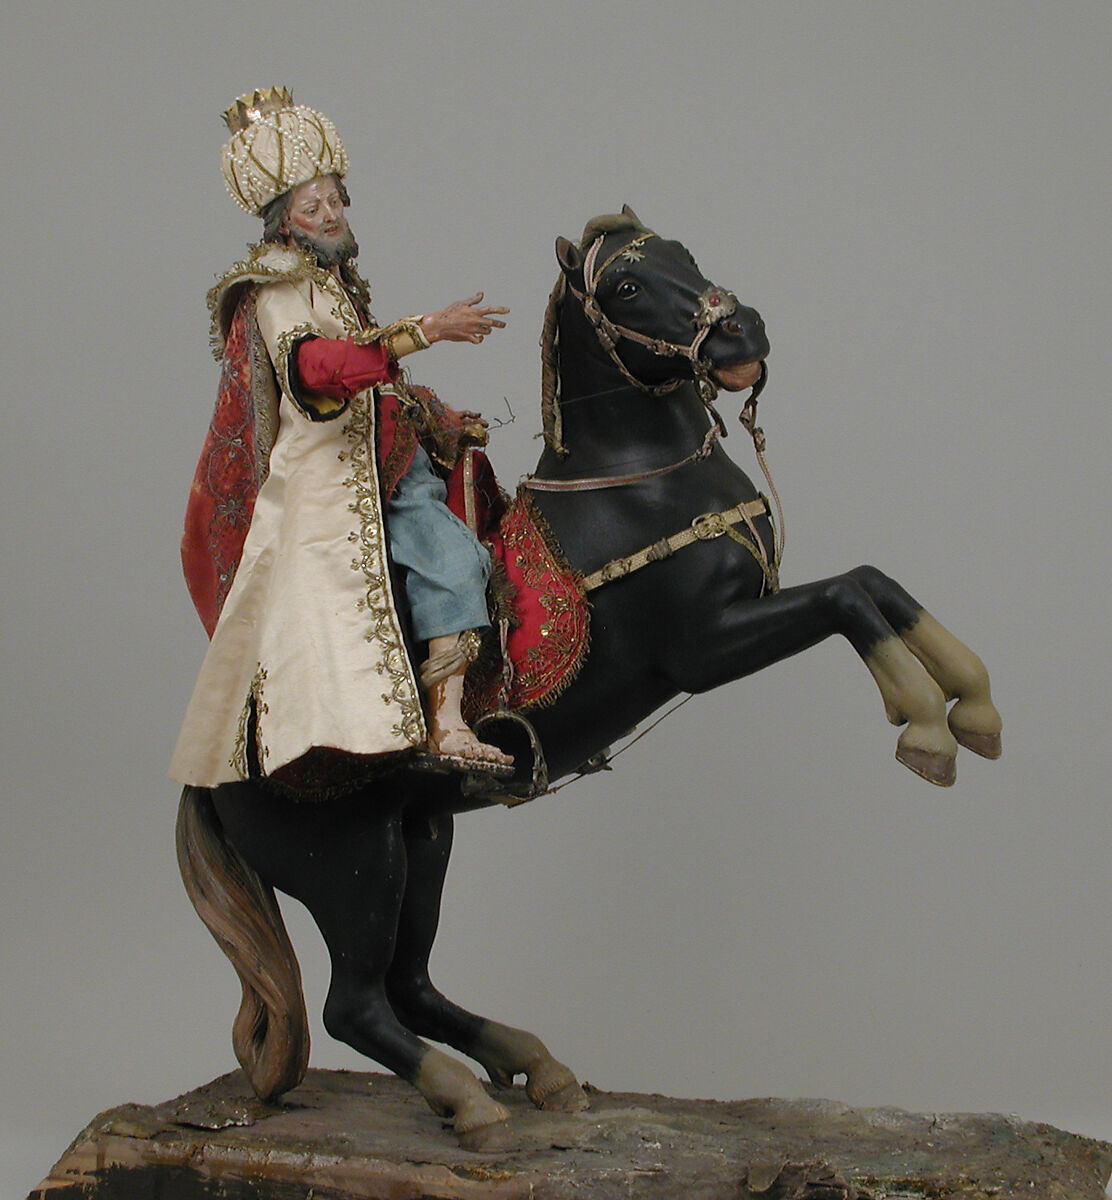 Black horse, Polychromed terracotta body; wooden legs and tail; velvet covered wooden saddle; satin saddle blanket with metallic thread; gold braided girth and neck strap with silver buckles; silver braided martingale, bridle and reins; gold braided mane; silver stirrups, Italian, Naples